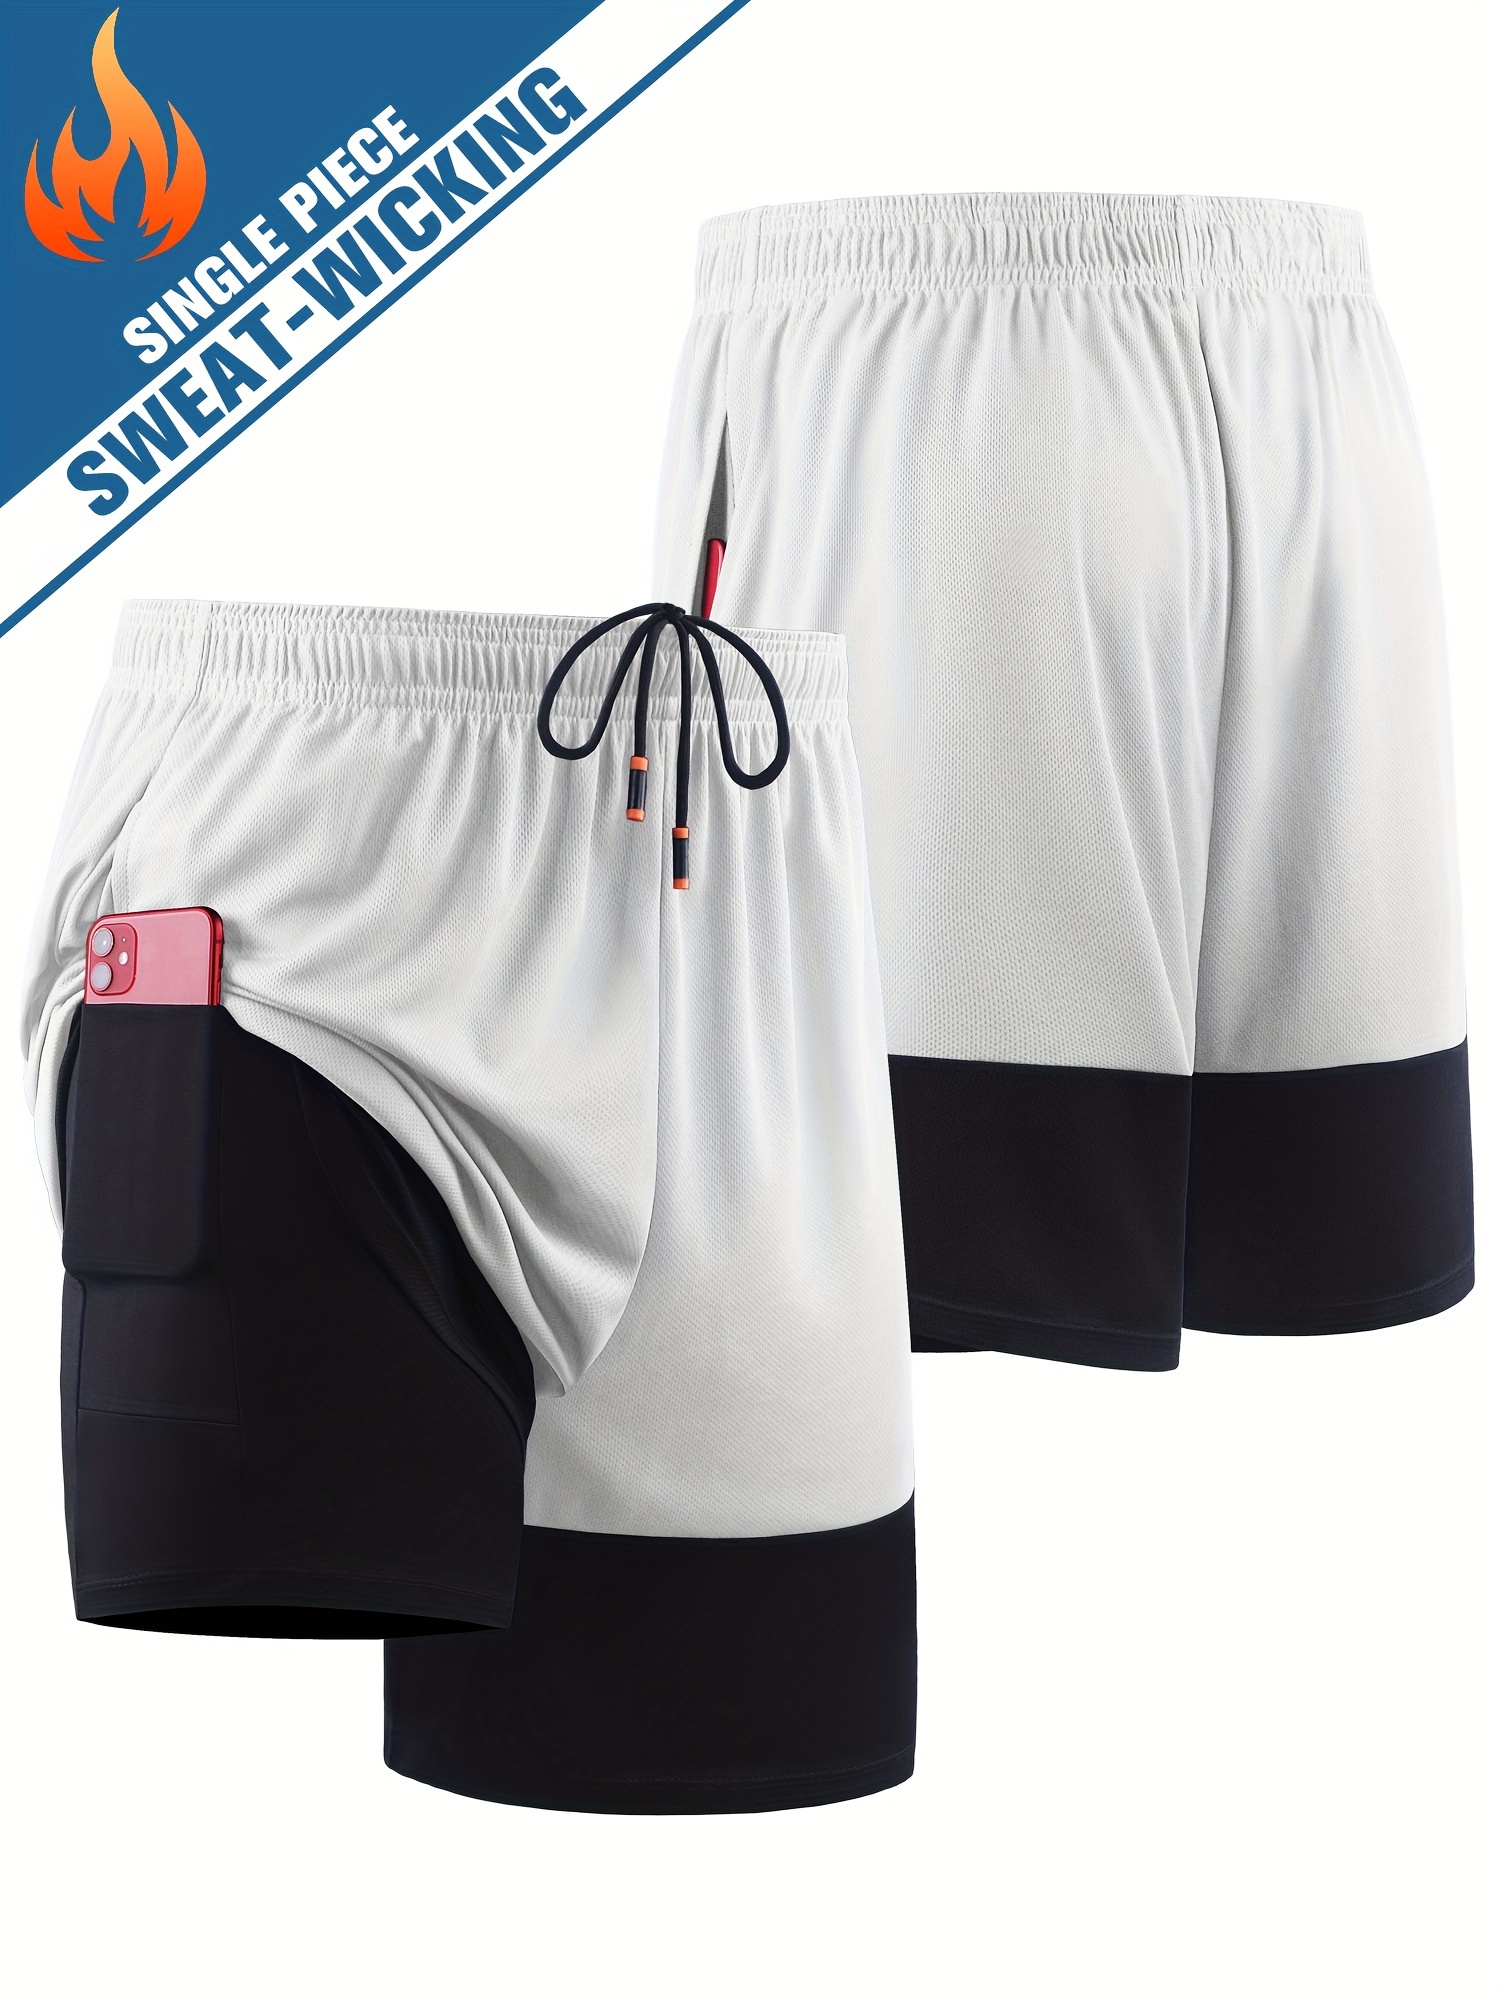 Men's Double Layer Golf Shorts with Drawstring 2 in 1 Workout Gym